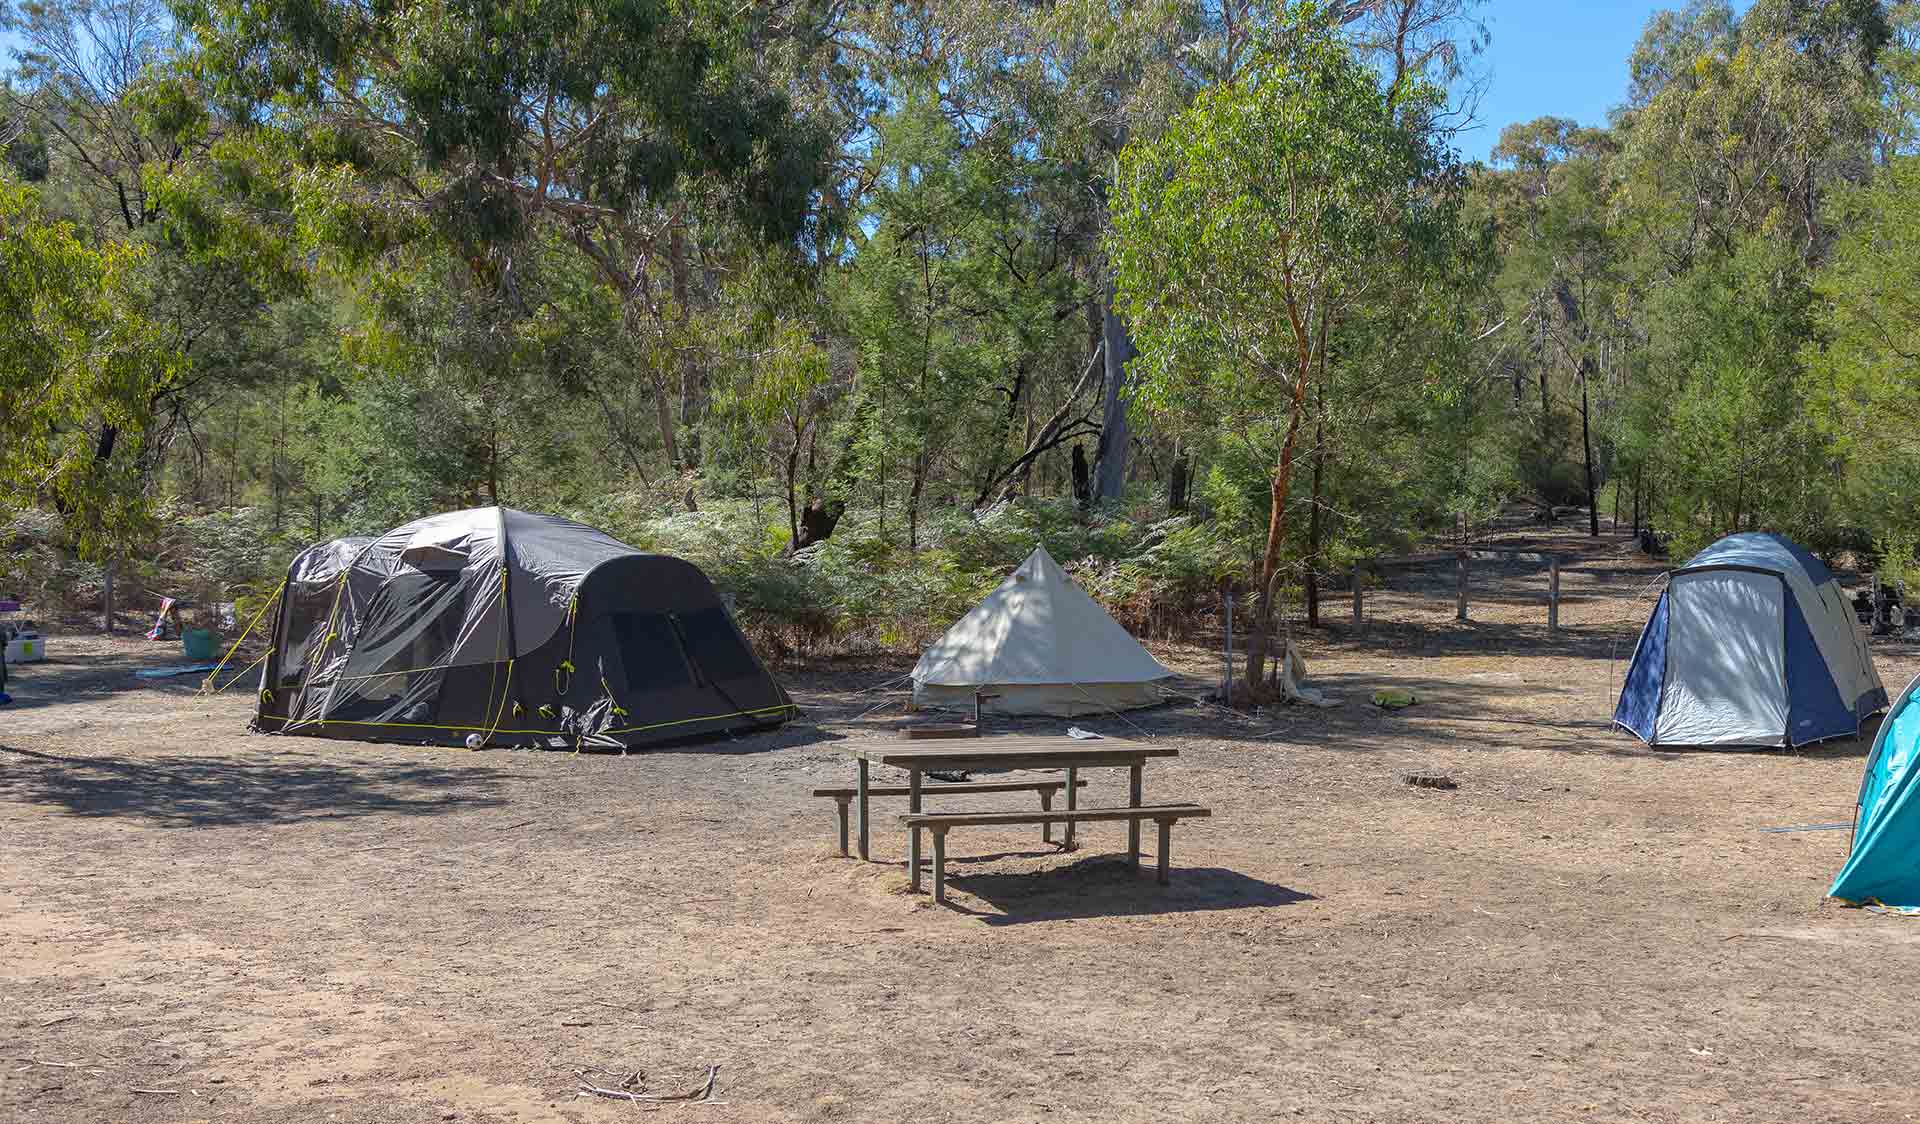 A picnic table and fireplace in front of tents at Buandik Campround in the Grampians National Park